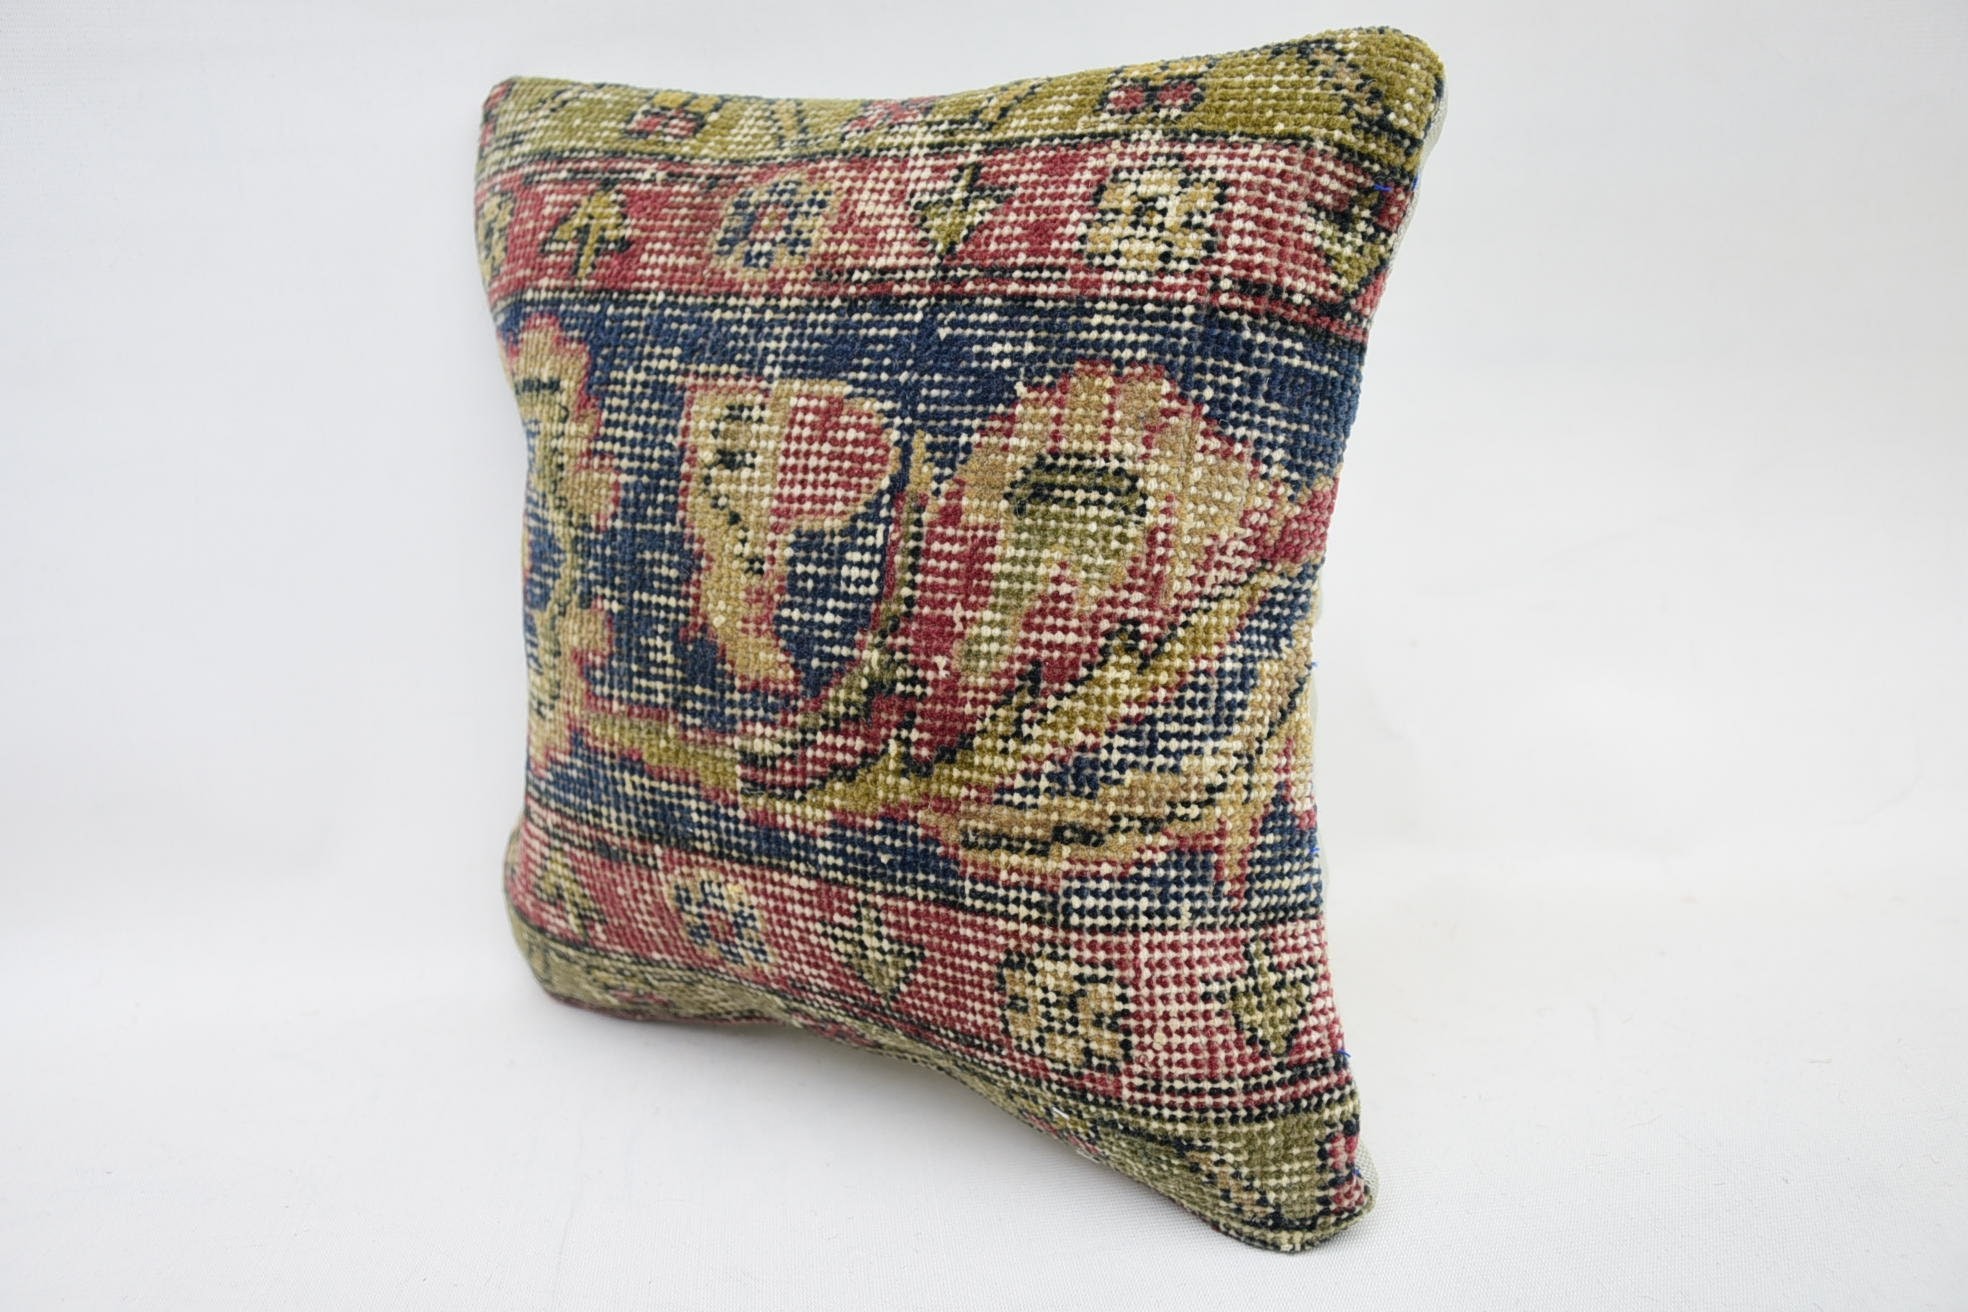 12"x12" Pink Pillow Cover, Antique Pillows, Pillow for Couch, Shabby Chic Pillow Cover, Kilim Cushion Sham, Decorative Bolster Pillow Sham